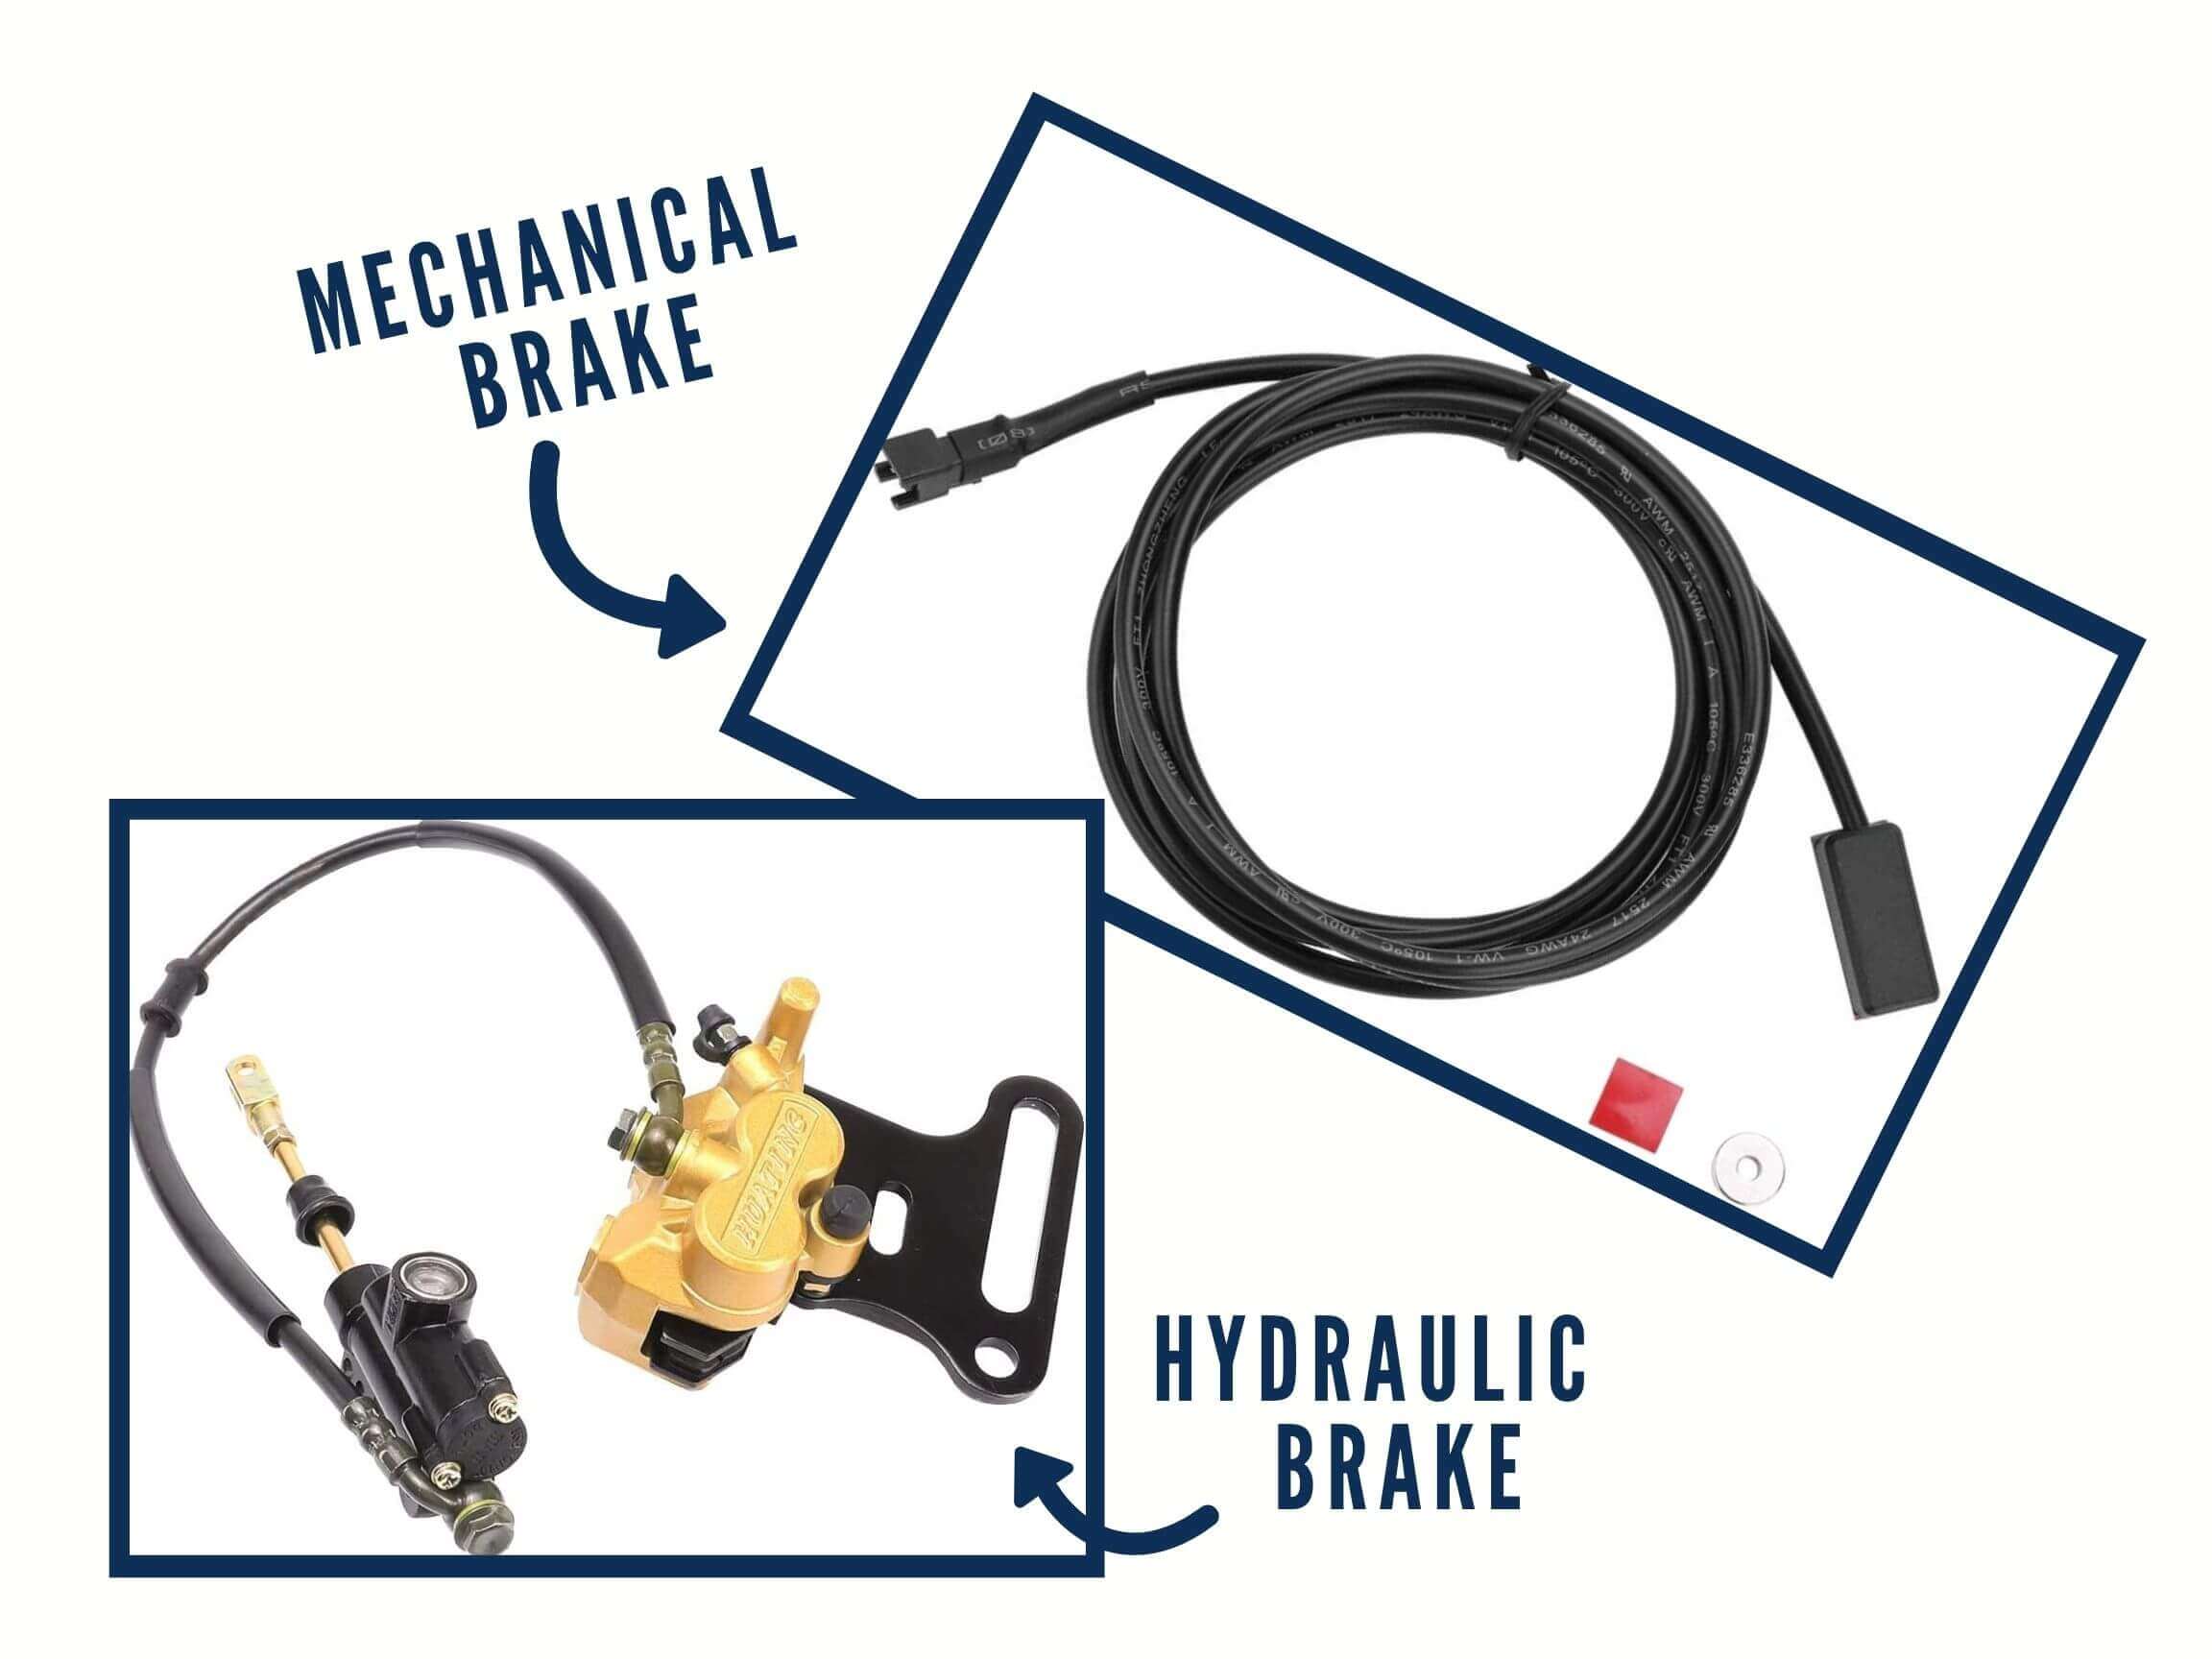 hydraulic vs. mechanical electric scooter brakes